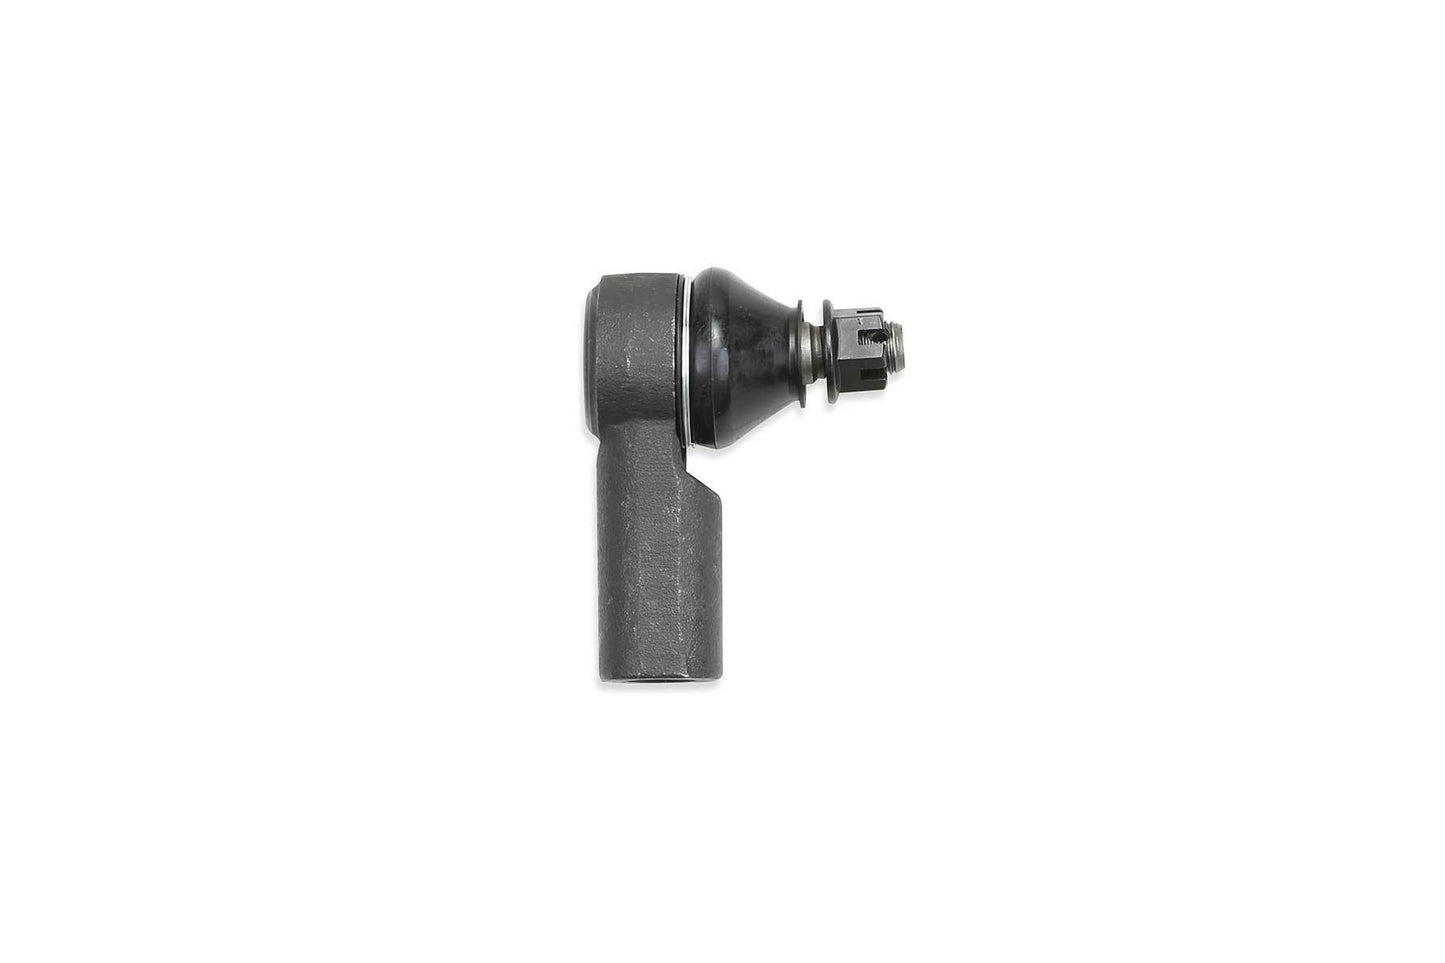 TACOMA TIE ROD REPLACEMENT FOR REPLC BOOT ORDER FT90119 - TACOMA TIE ROD REPLA - Fabtech - Texas Complete Truck Center